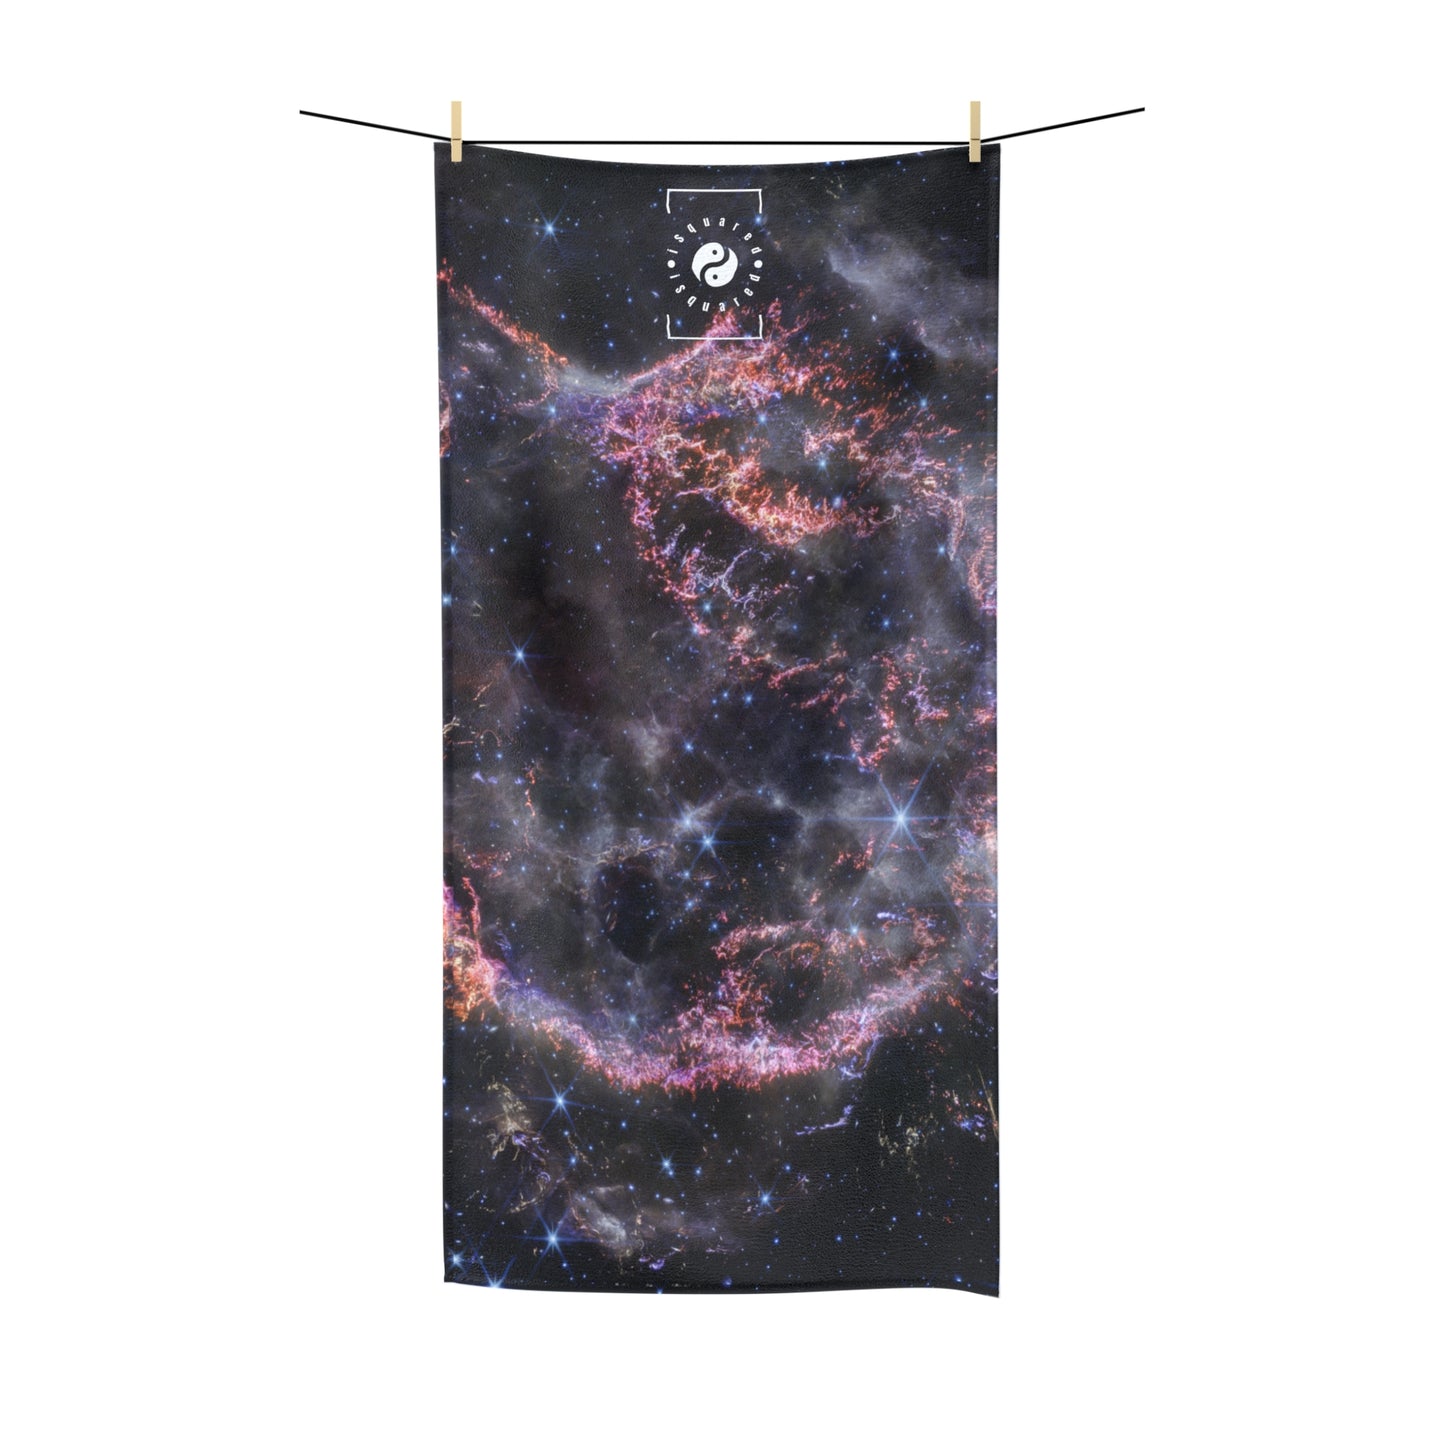 Cassiopeia A (NIRCam Image) - JWST Collection - All Purpose Yoga Towel